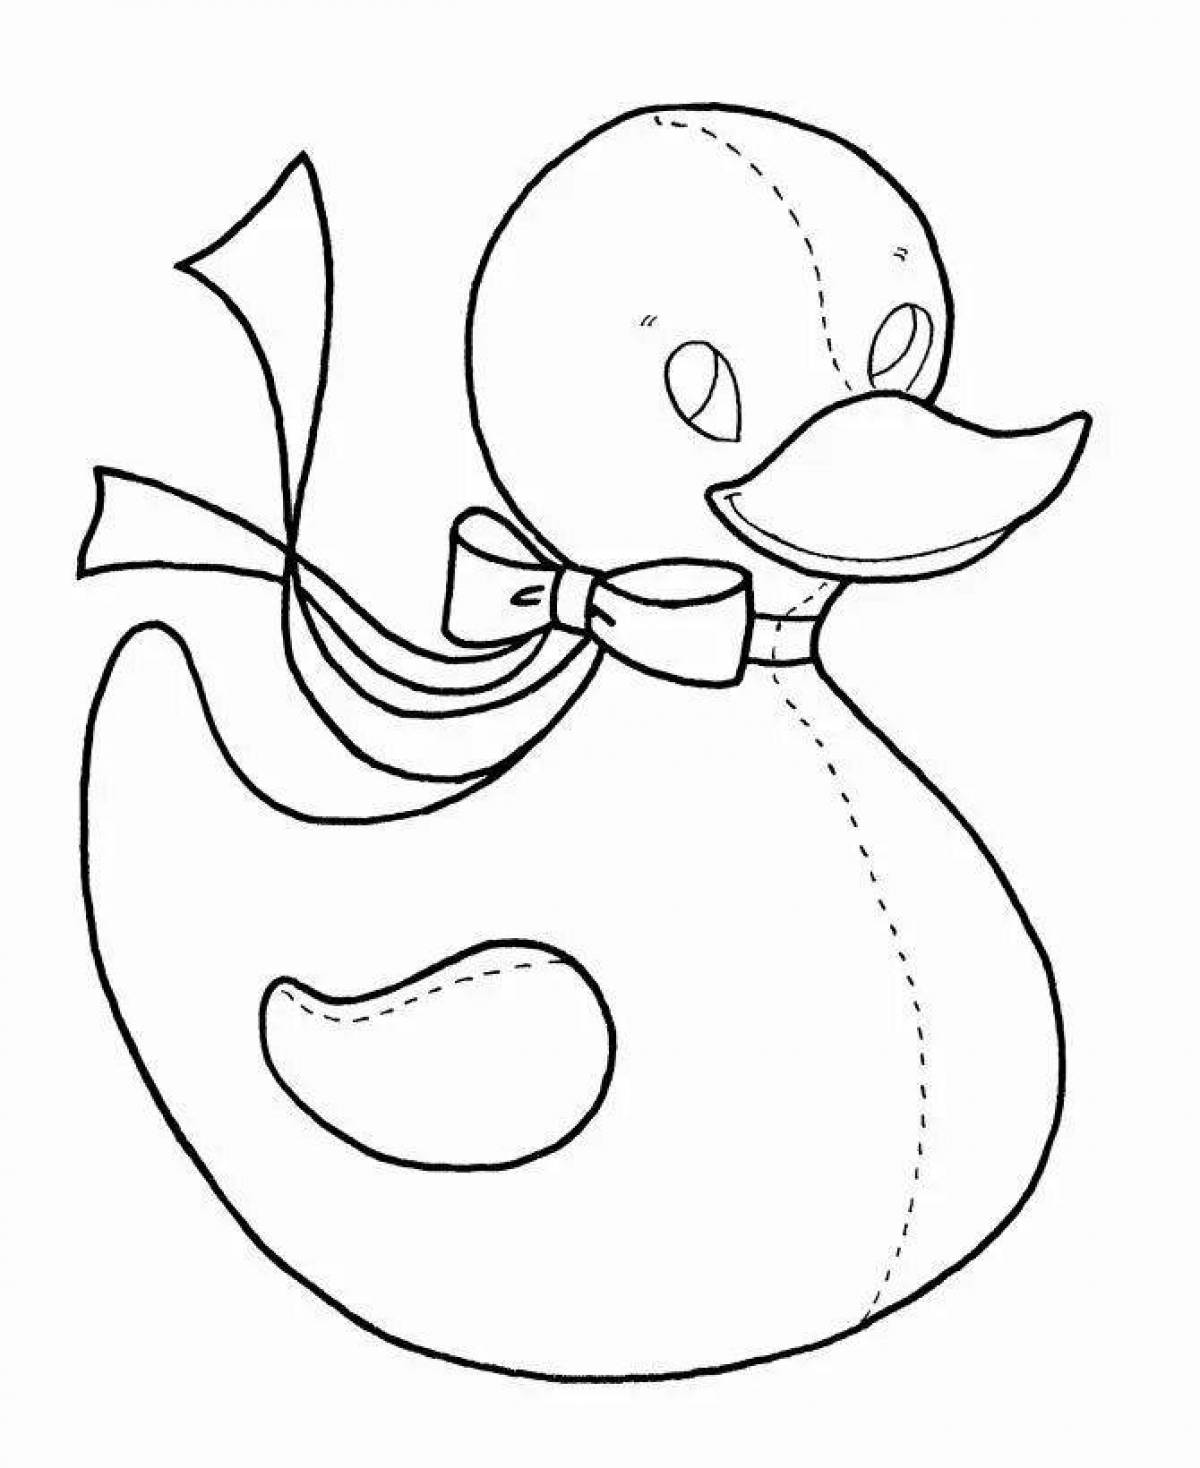 Lolofan duck coloring page filled with color